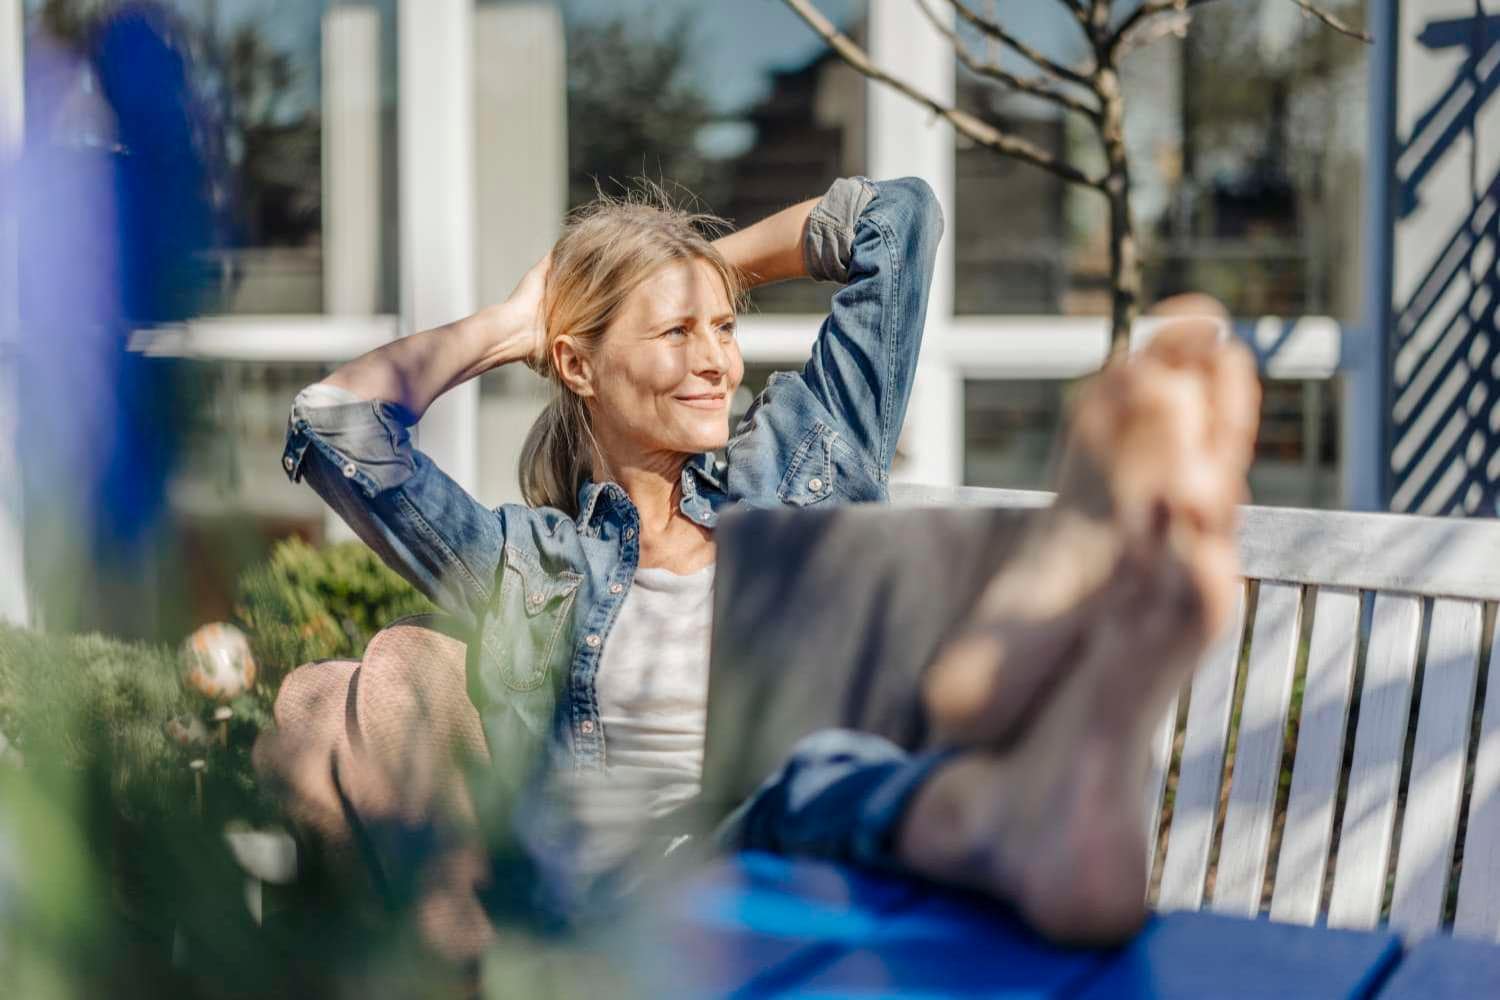 Smiling woman with laptop relaxing outside on garden bench